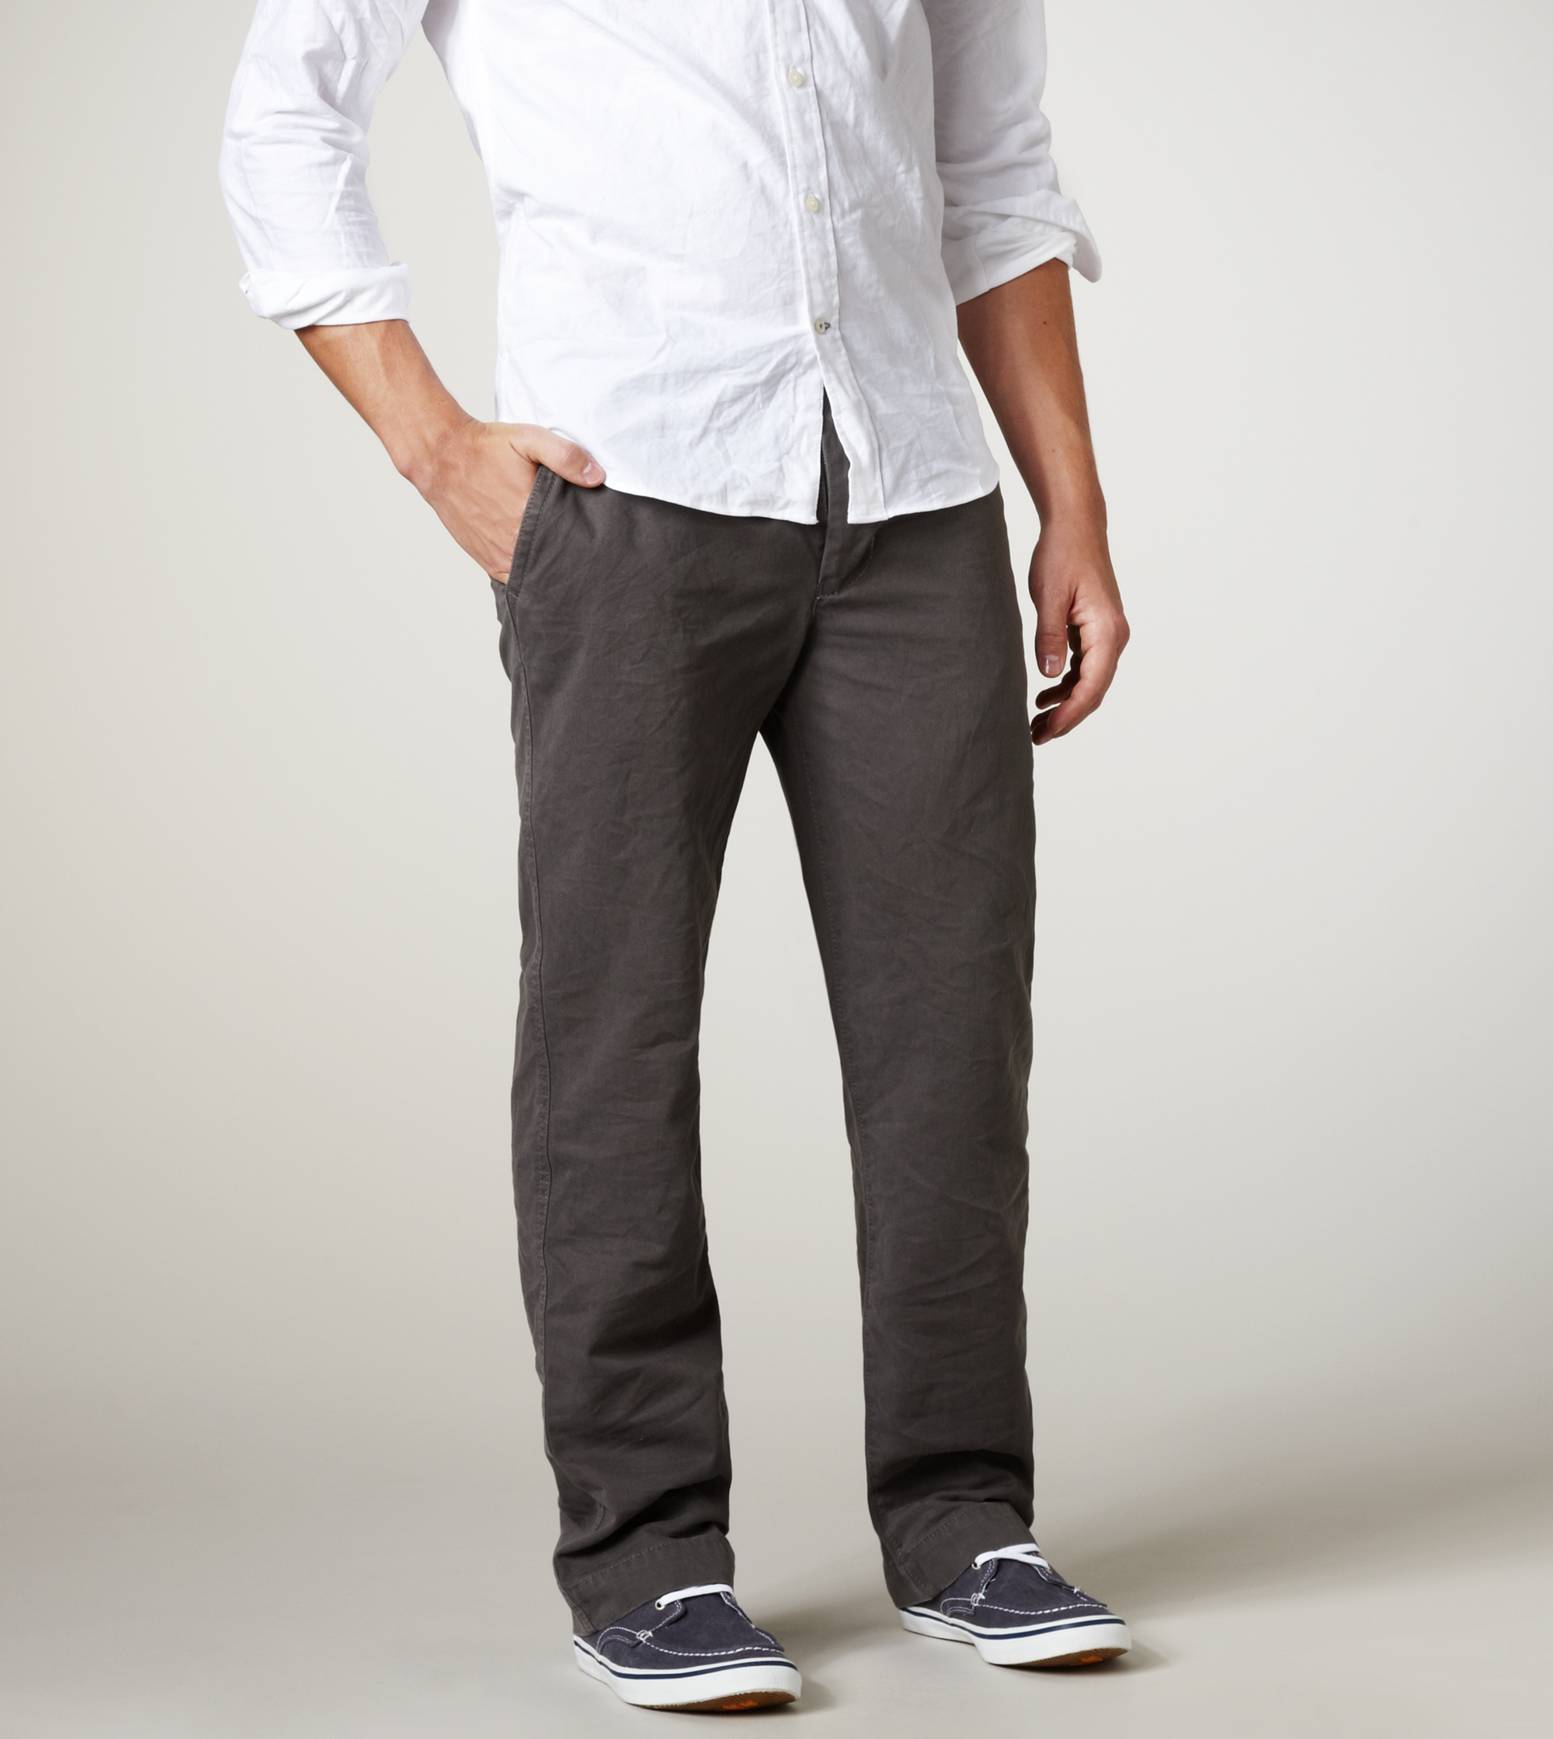 american eagle (ae american eagle) male models relaxed relaxed models ...